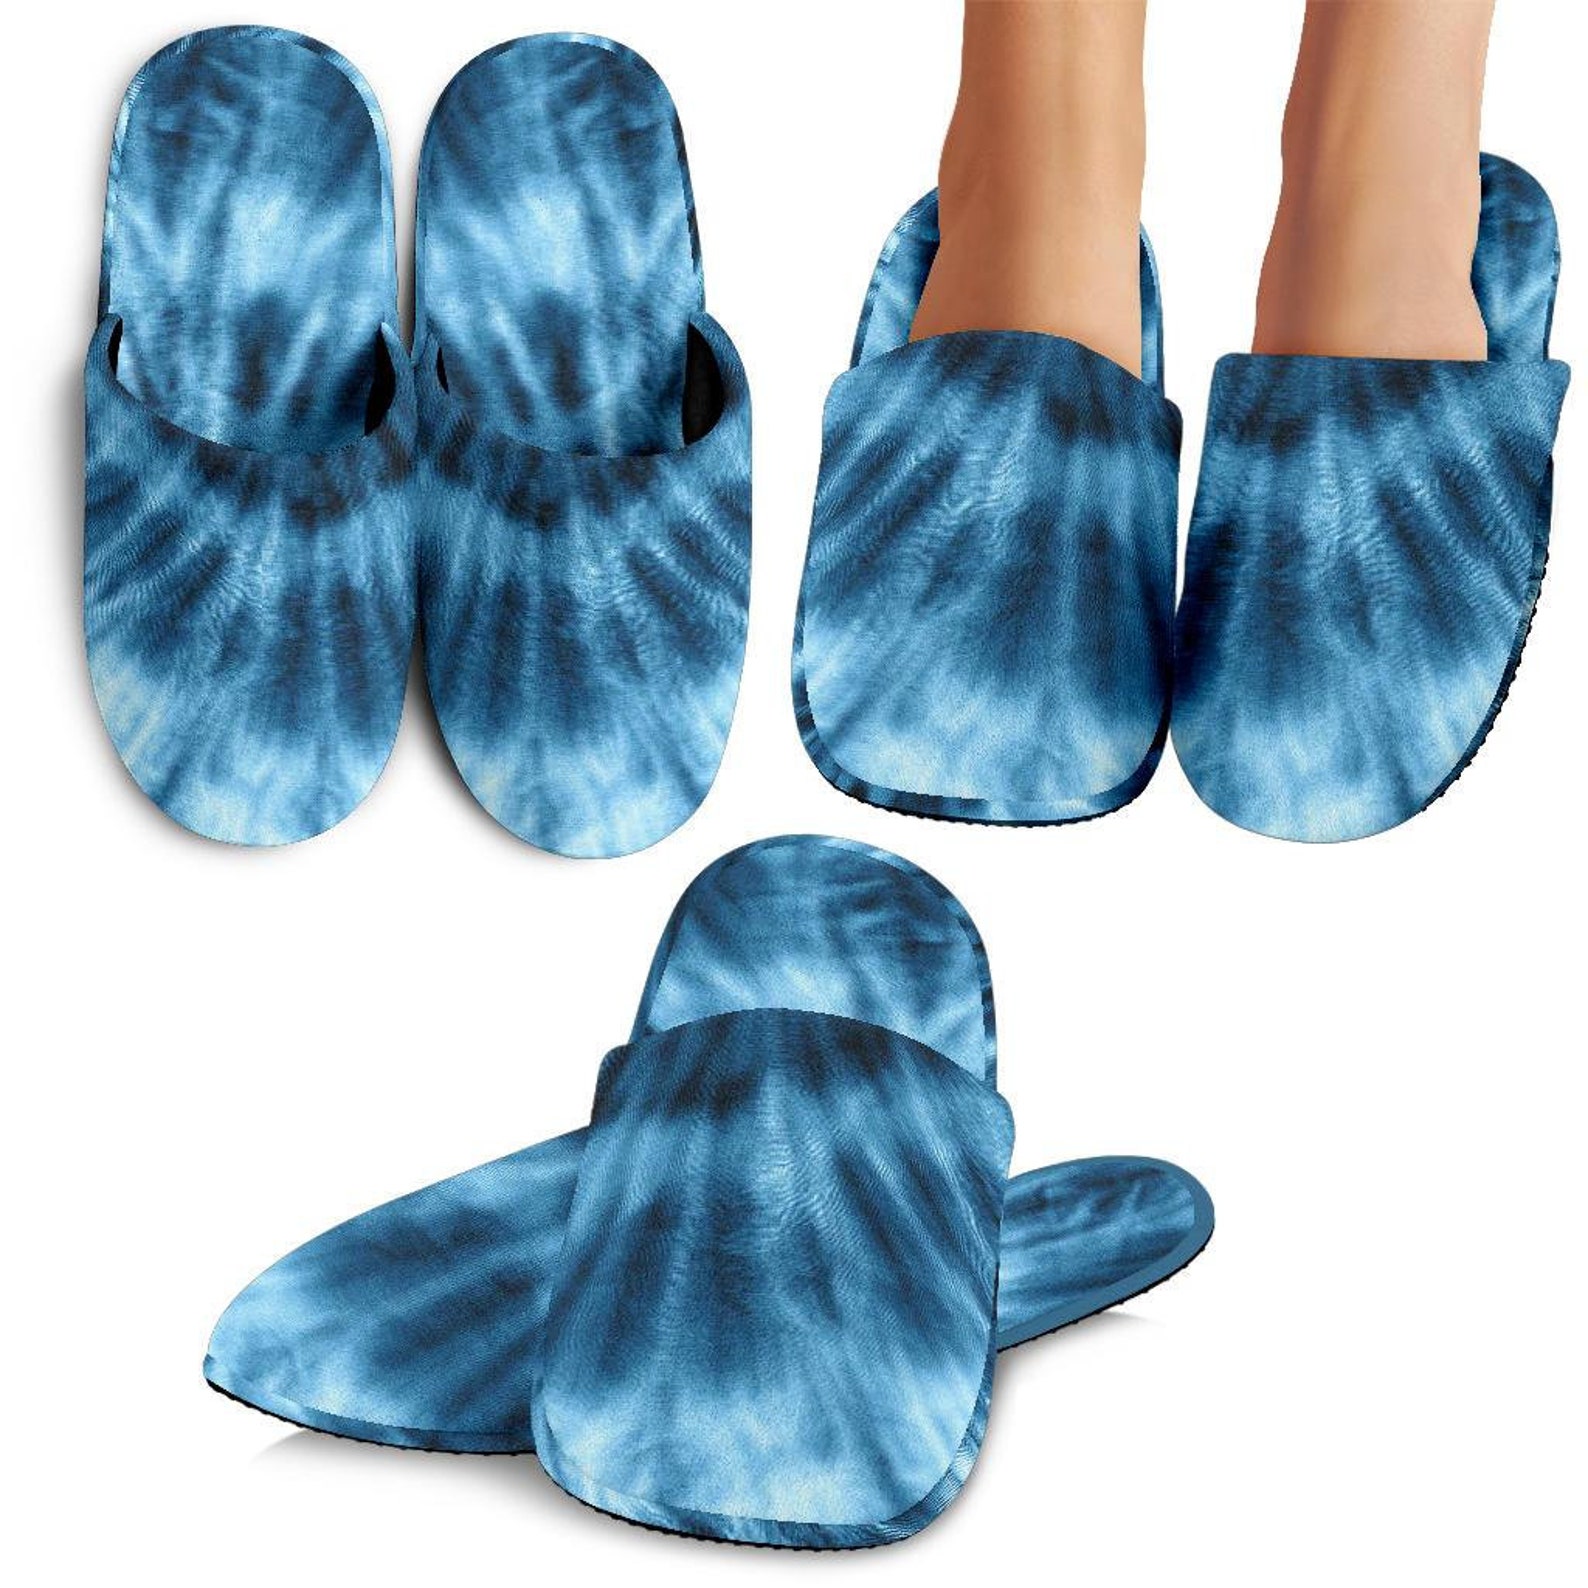 Blue Tie Dye Print Slippers Comfortable House Slippers | Etsy